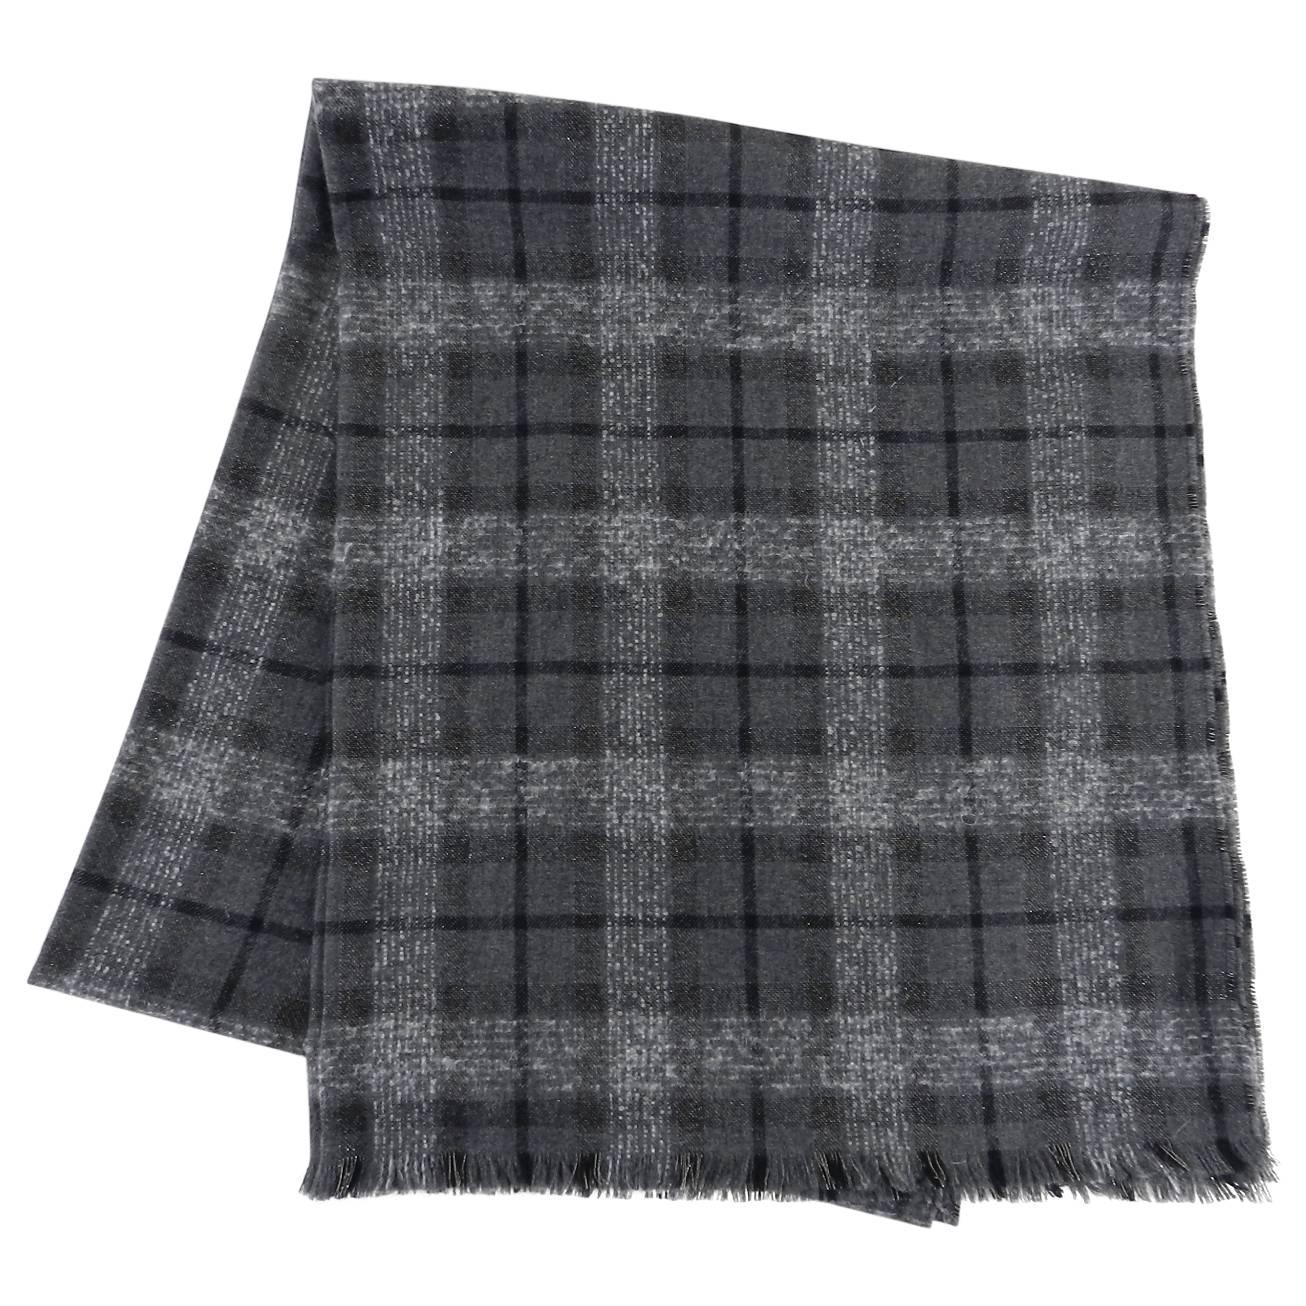 Brunello Cucinelli Charcoal Grey Check Large Rectangular Shawl Scarf.  Charcoal grey with black and very fine silver metallic threaded accents. 88% cashmere, 6 alpaca, 4 cupro, 1 polyester, 1 polyamide. Rectangular format.  Measures 78” x 33”.